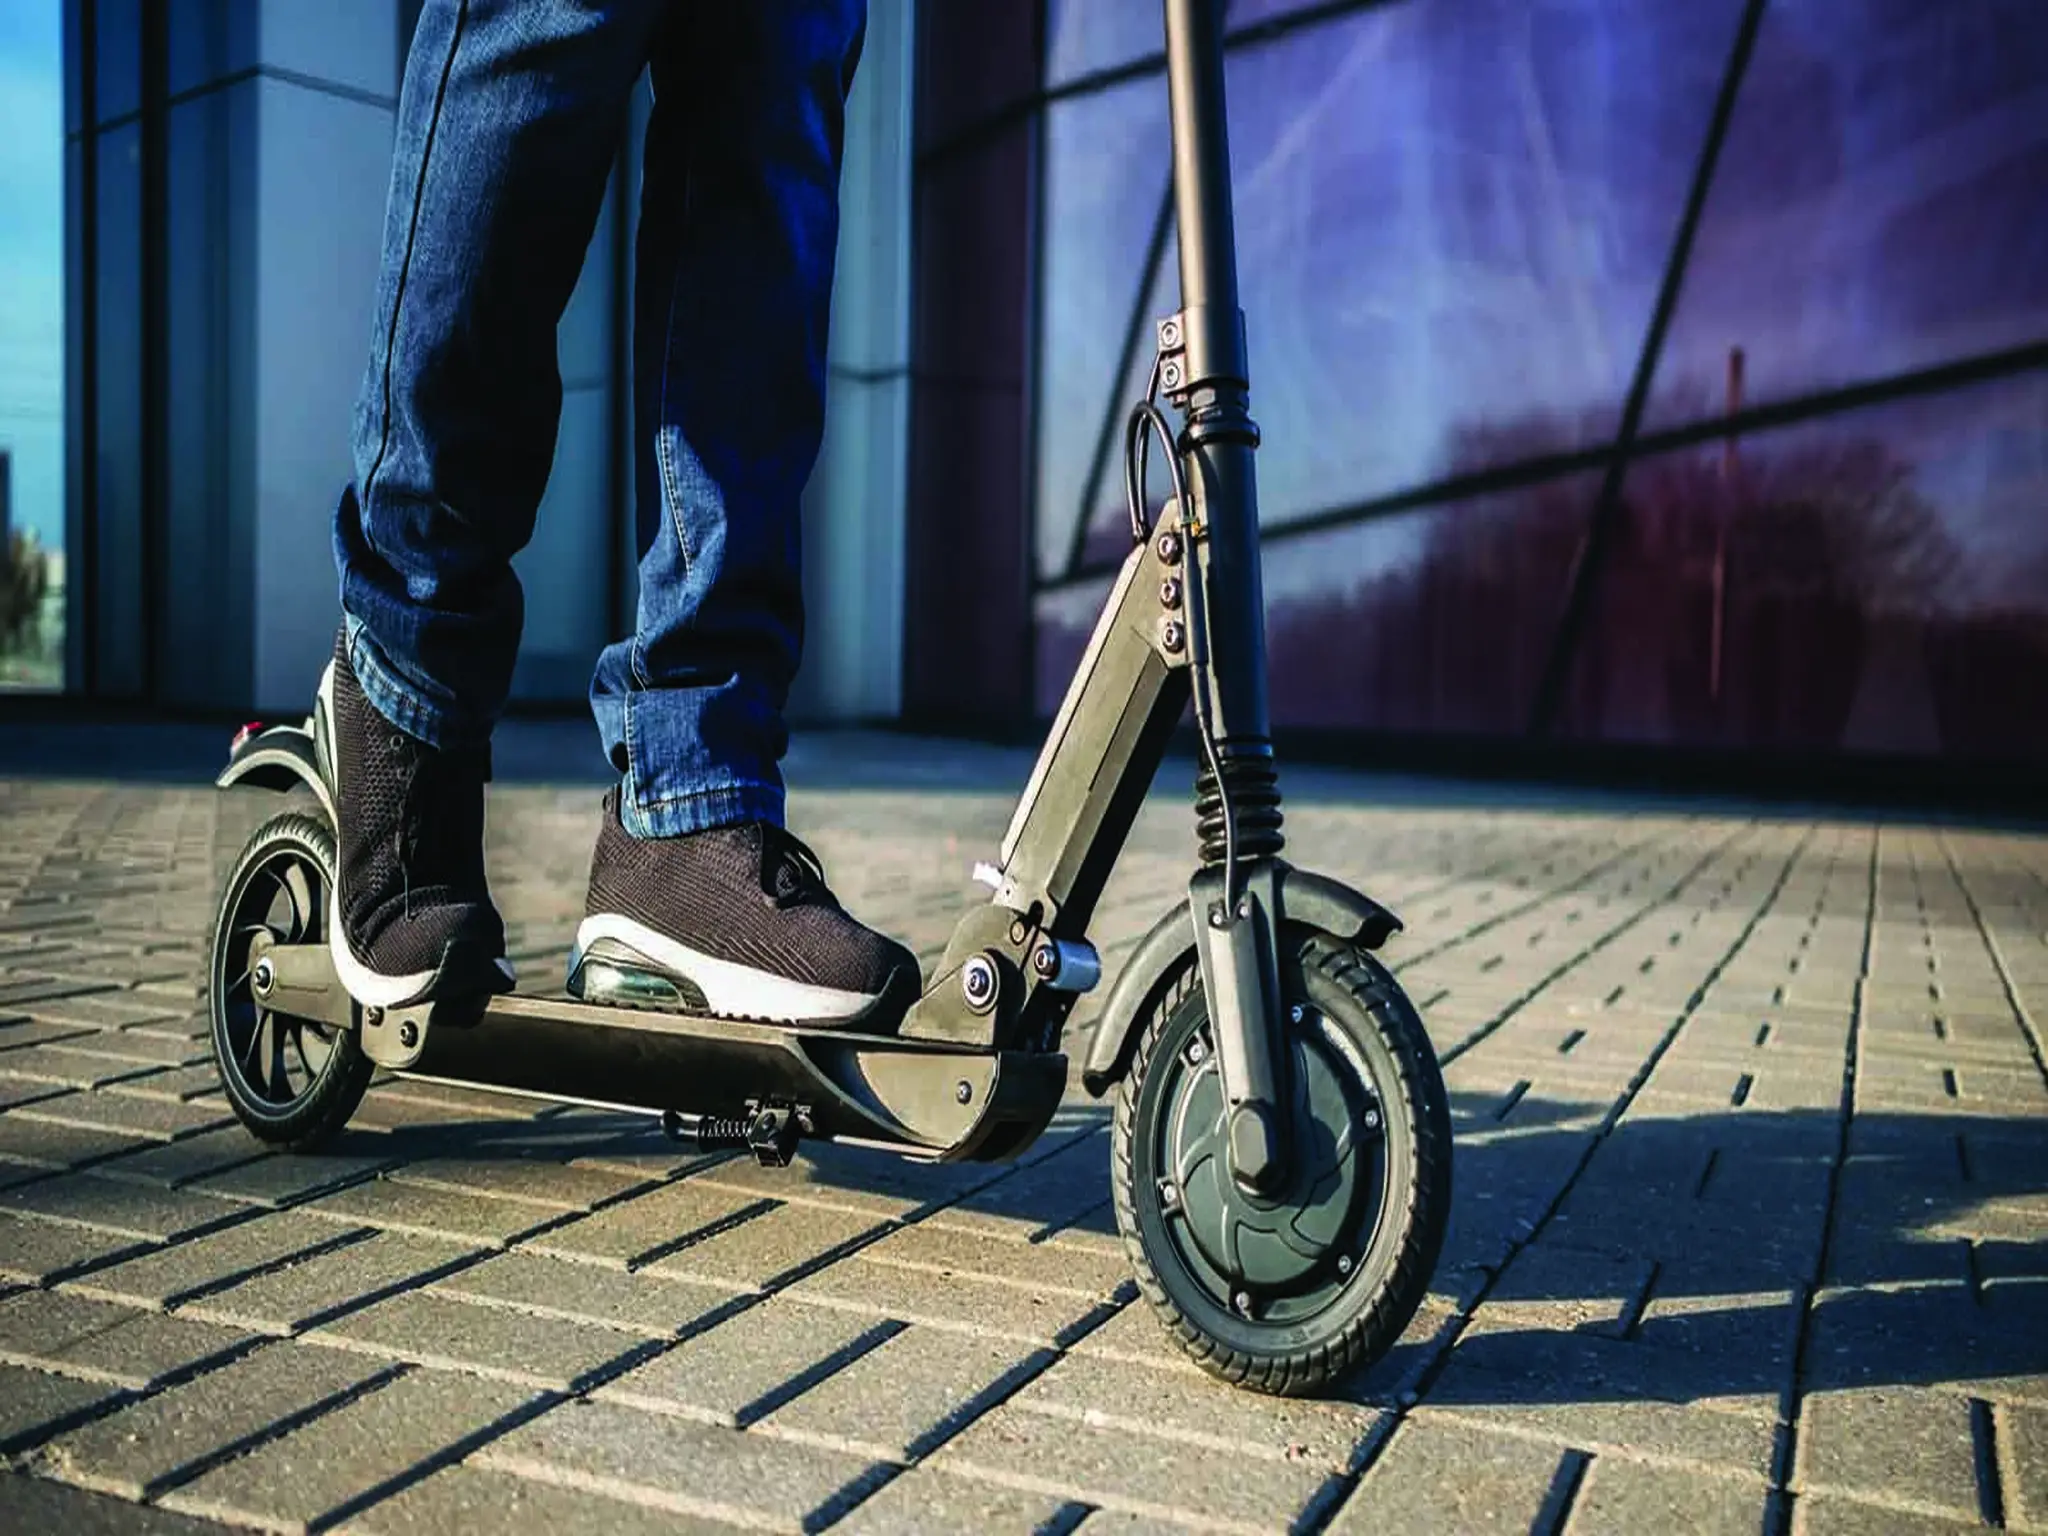 UAE: RTA completely prohibits the use of e-scooters in these places